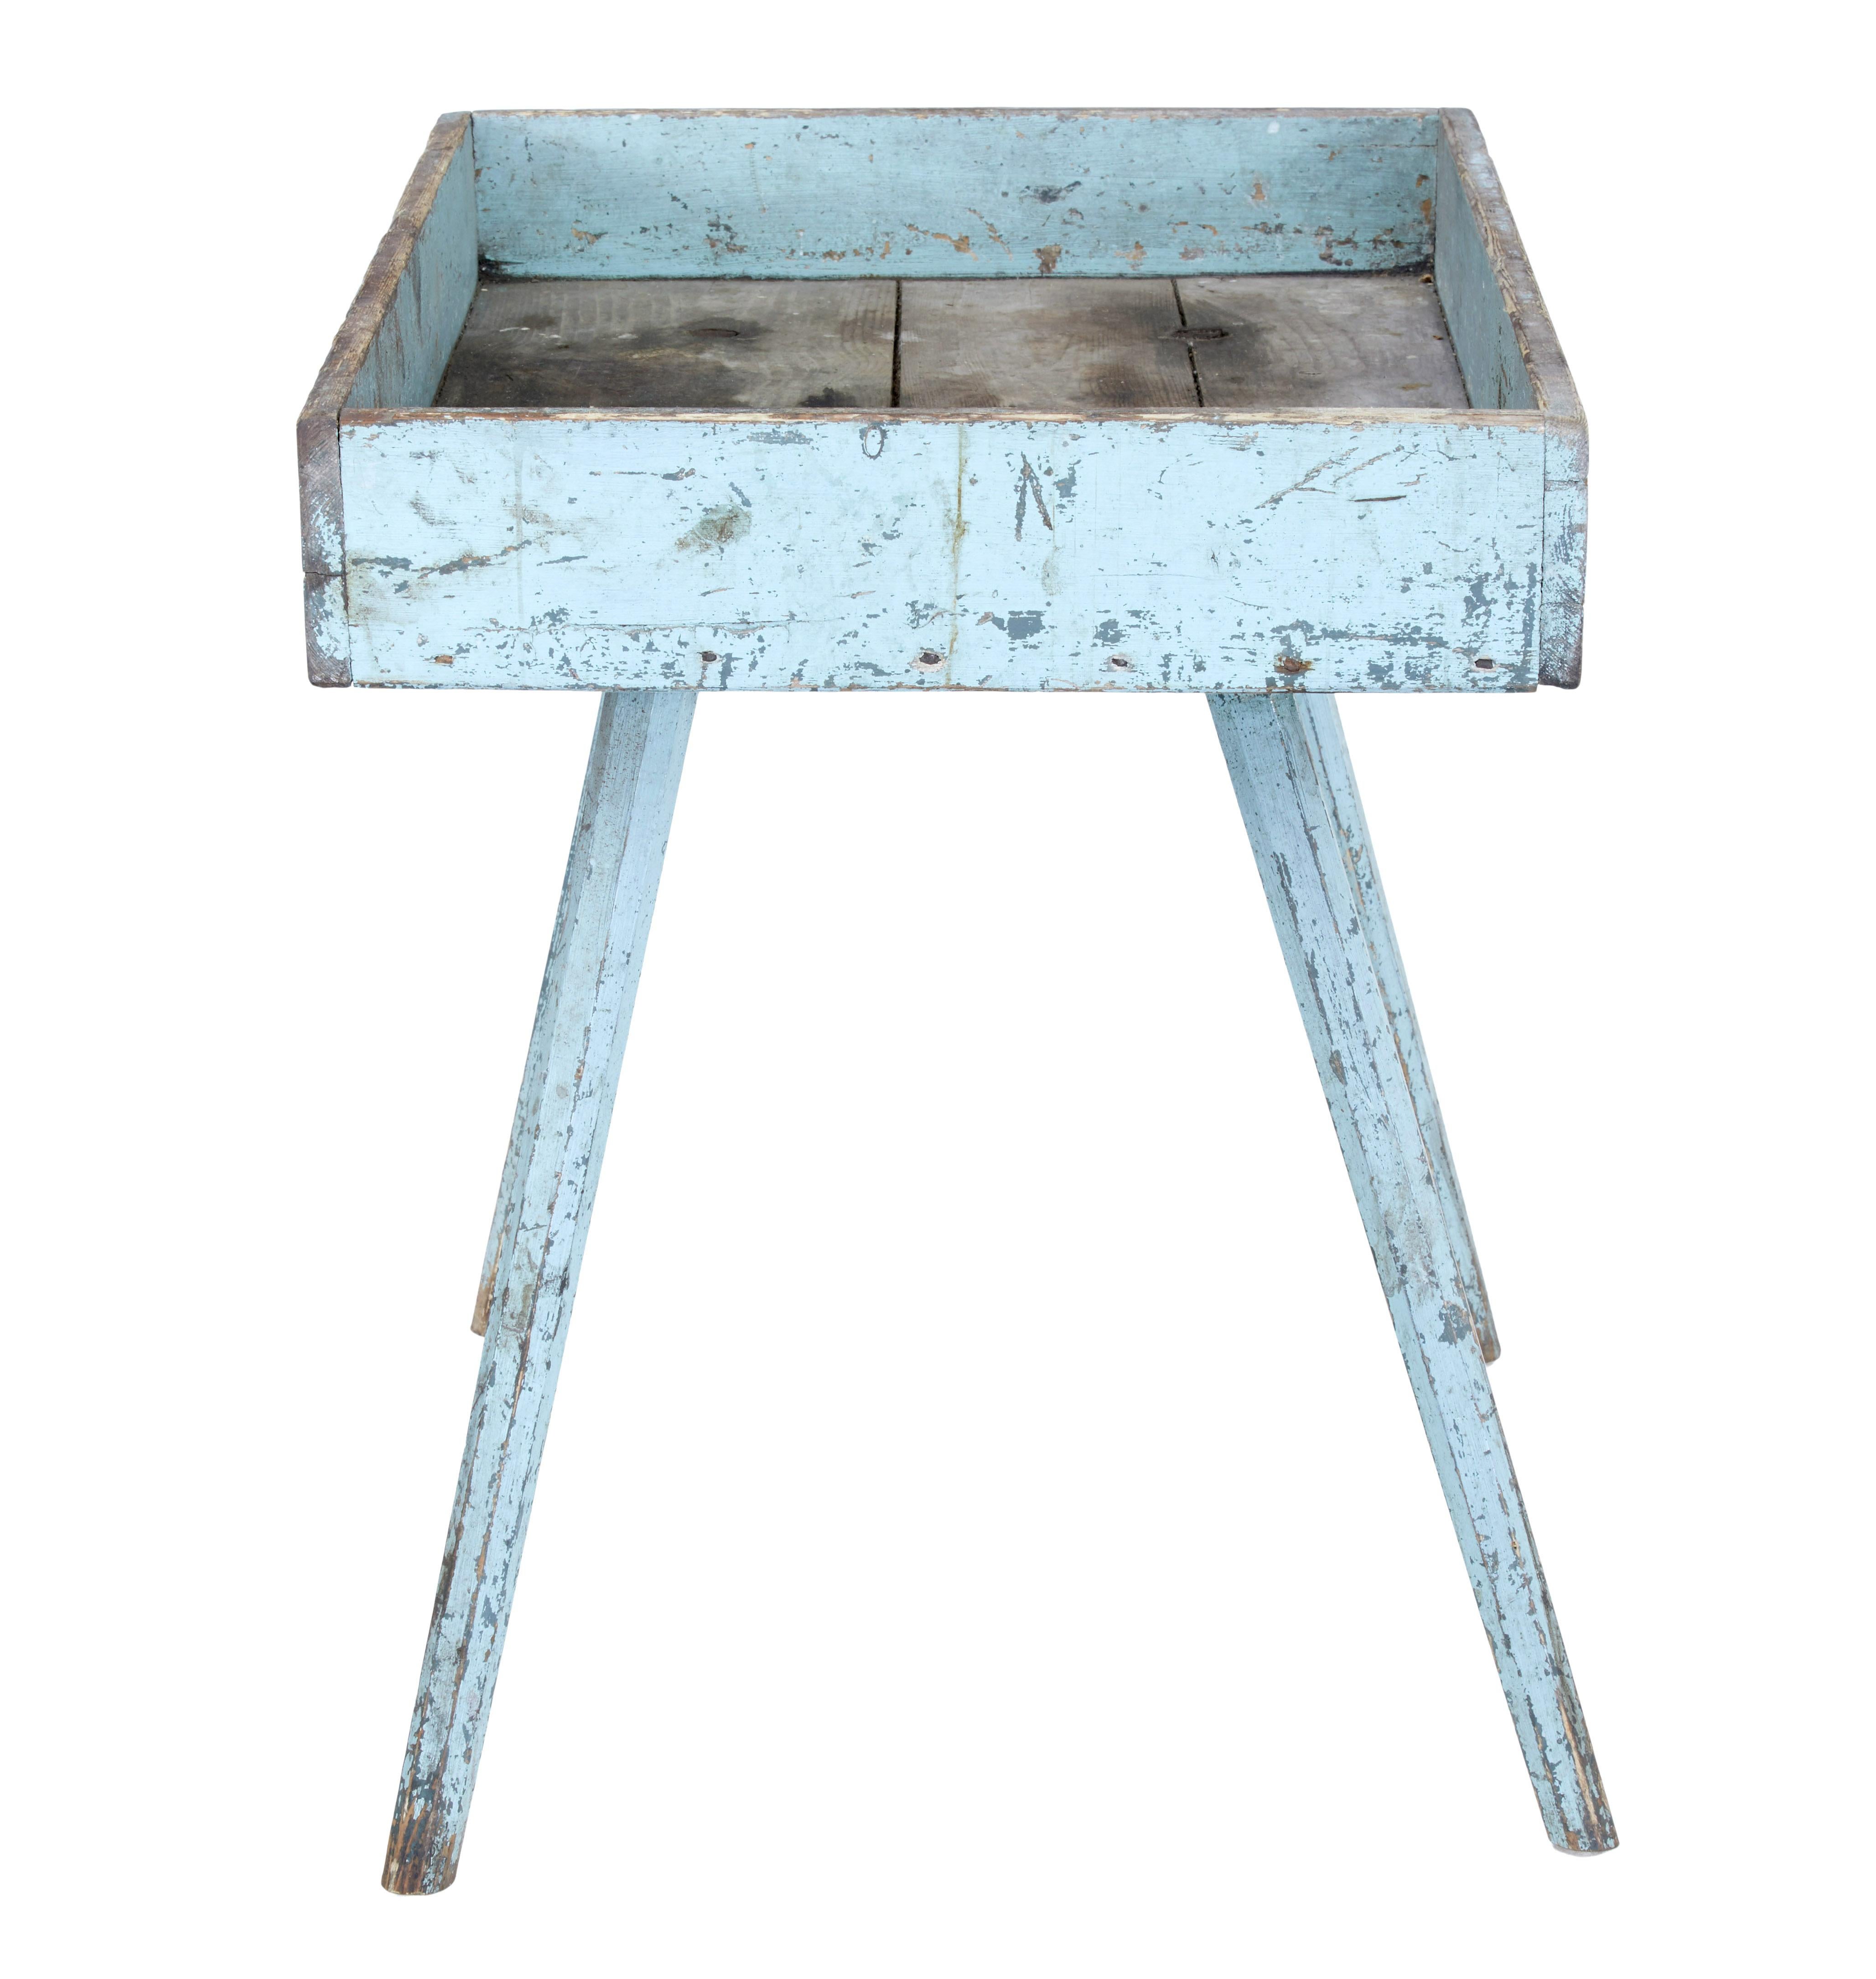 19th Century Rustic Painted Pine Garden Room Tray Table For Sale 1